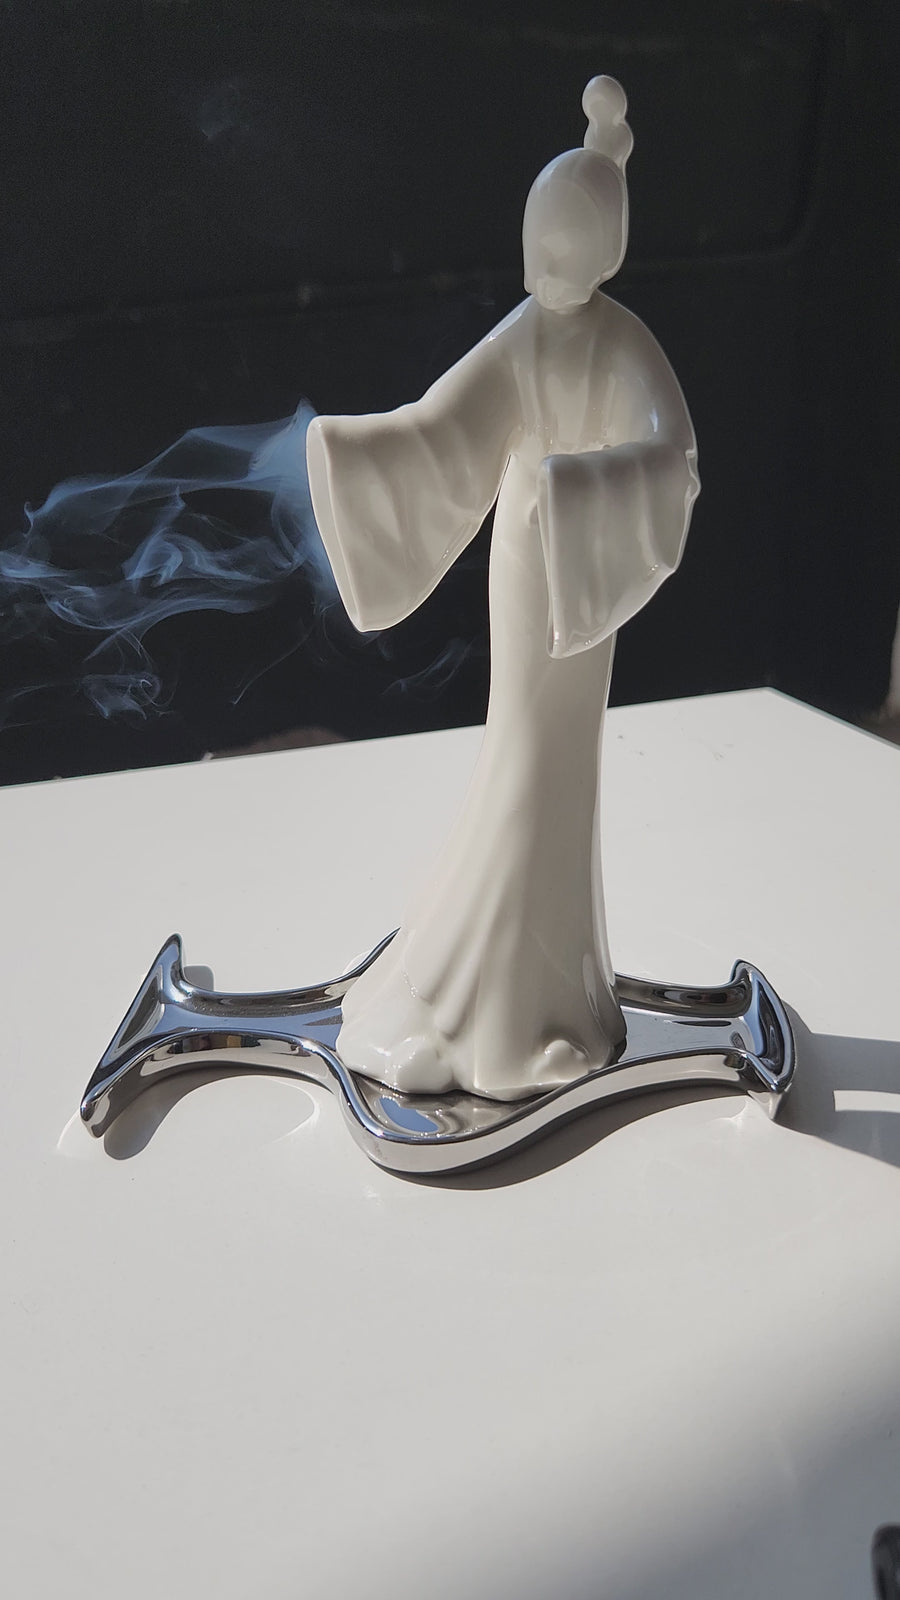 XI XING LE / Ancient Lady Incense Holder • White